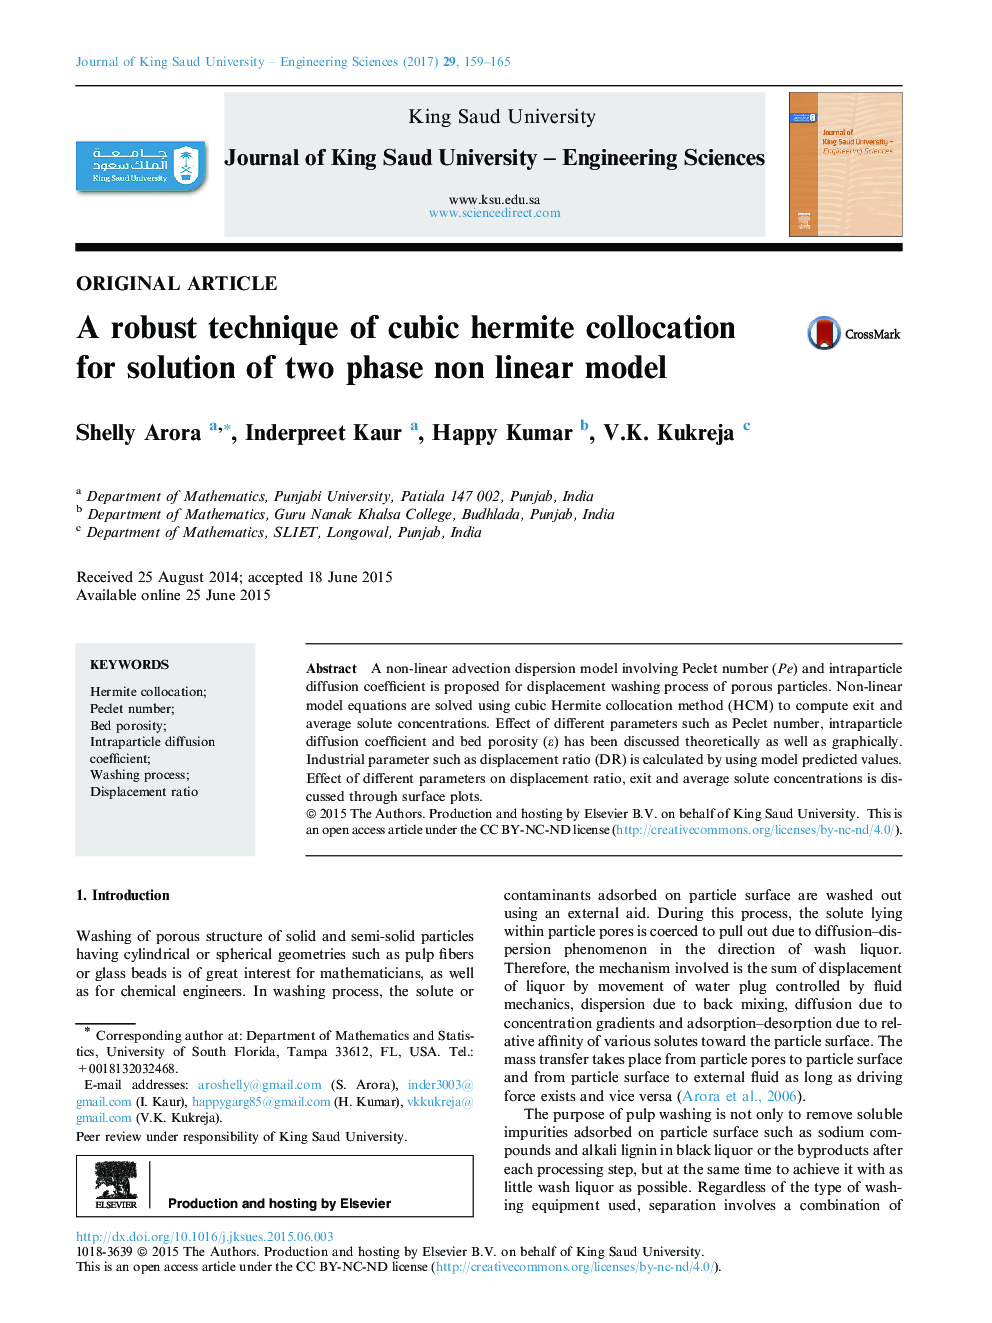 A robust technique of cubic hermite collocation for solution of two phase non linear model